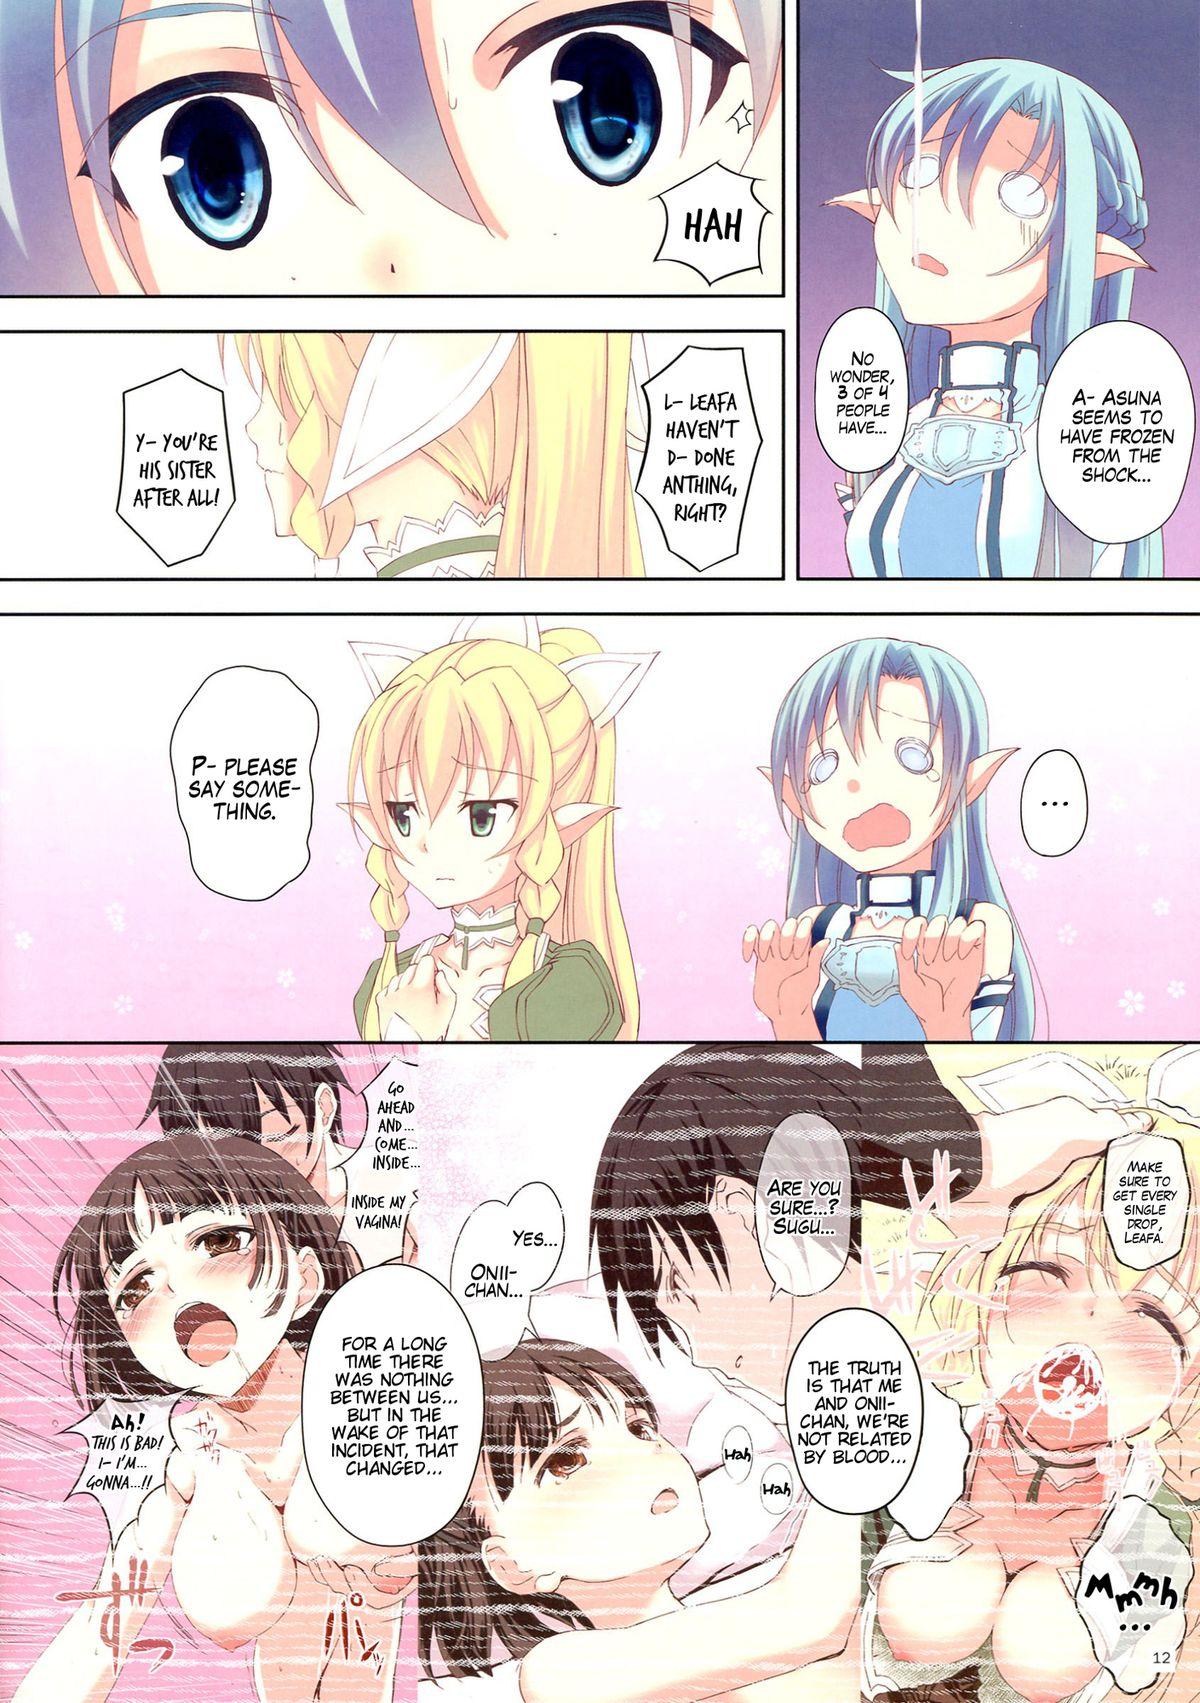 Tied Mad Tea Party - Sword art online Canadian - Page 12